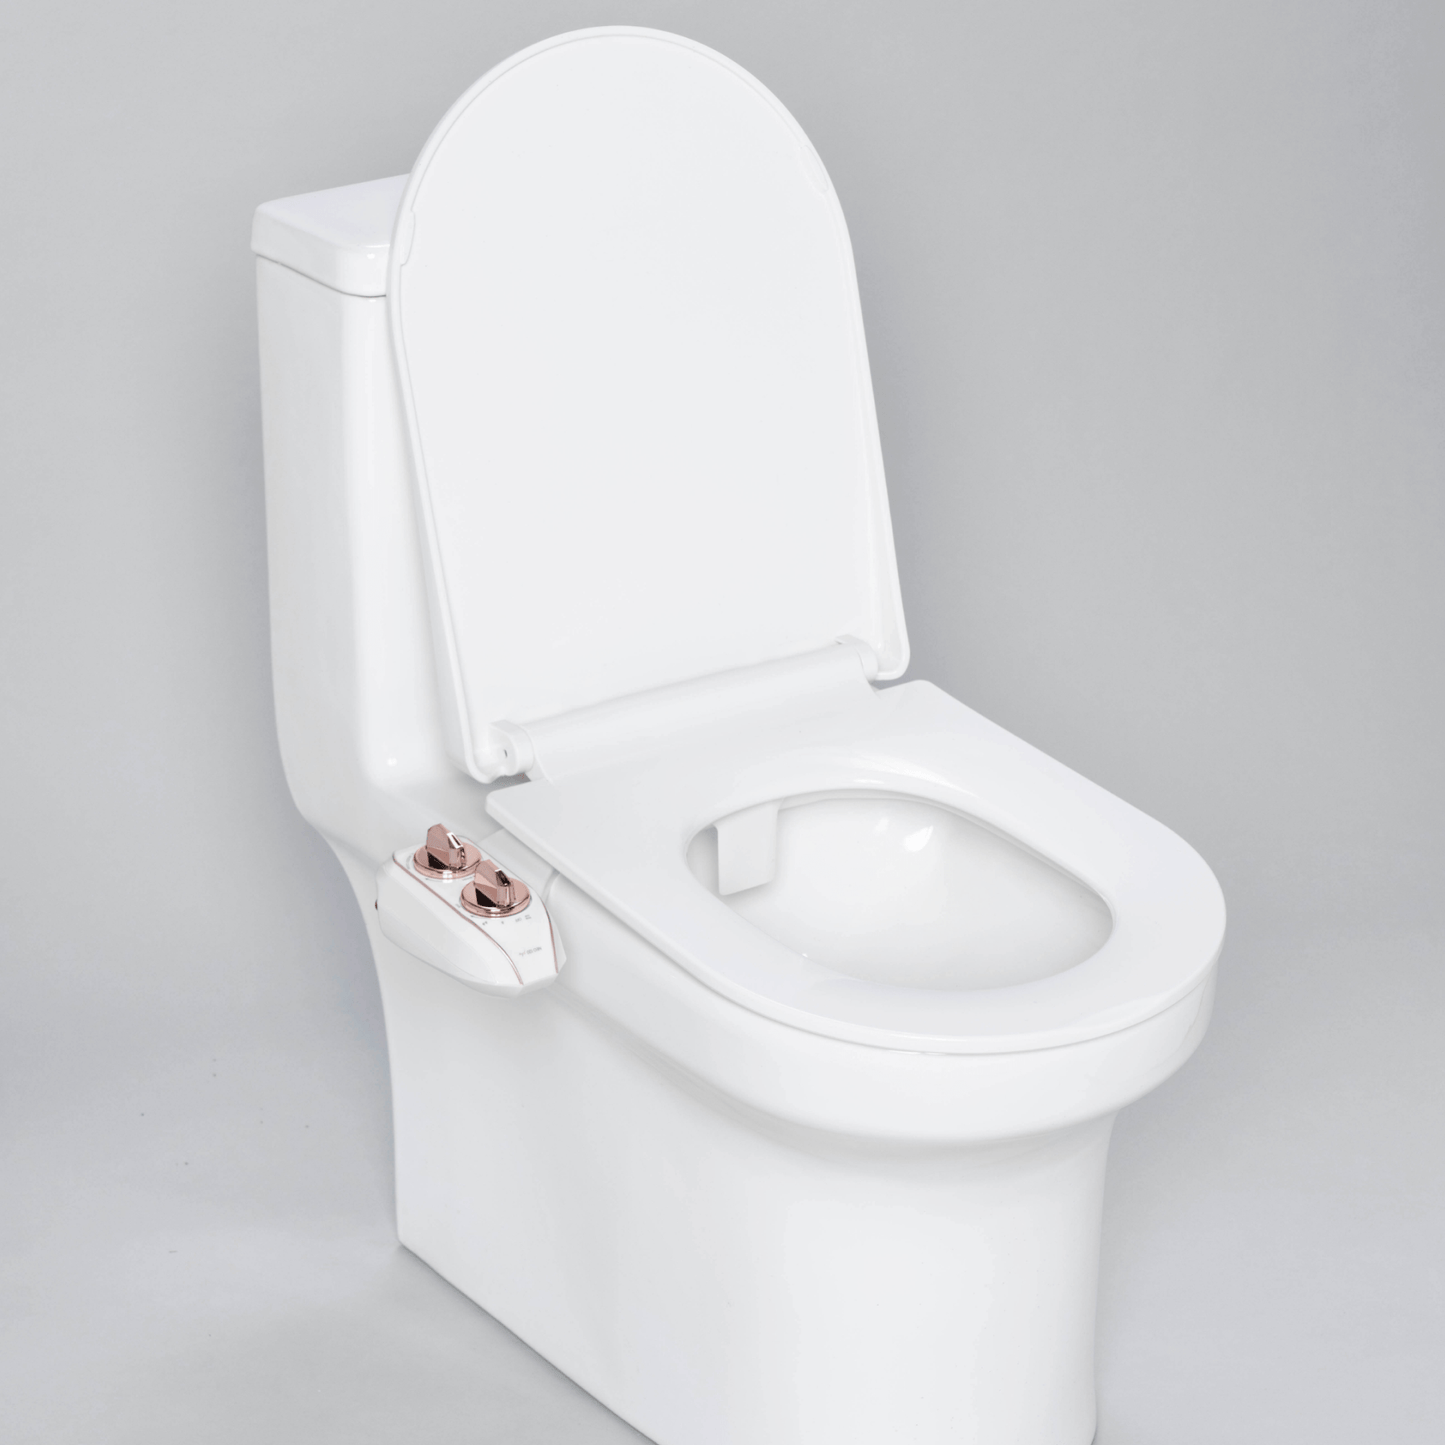 NEO 120 Plus Rose Gold installed on a modern toilet, with lid open